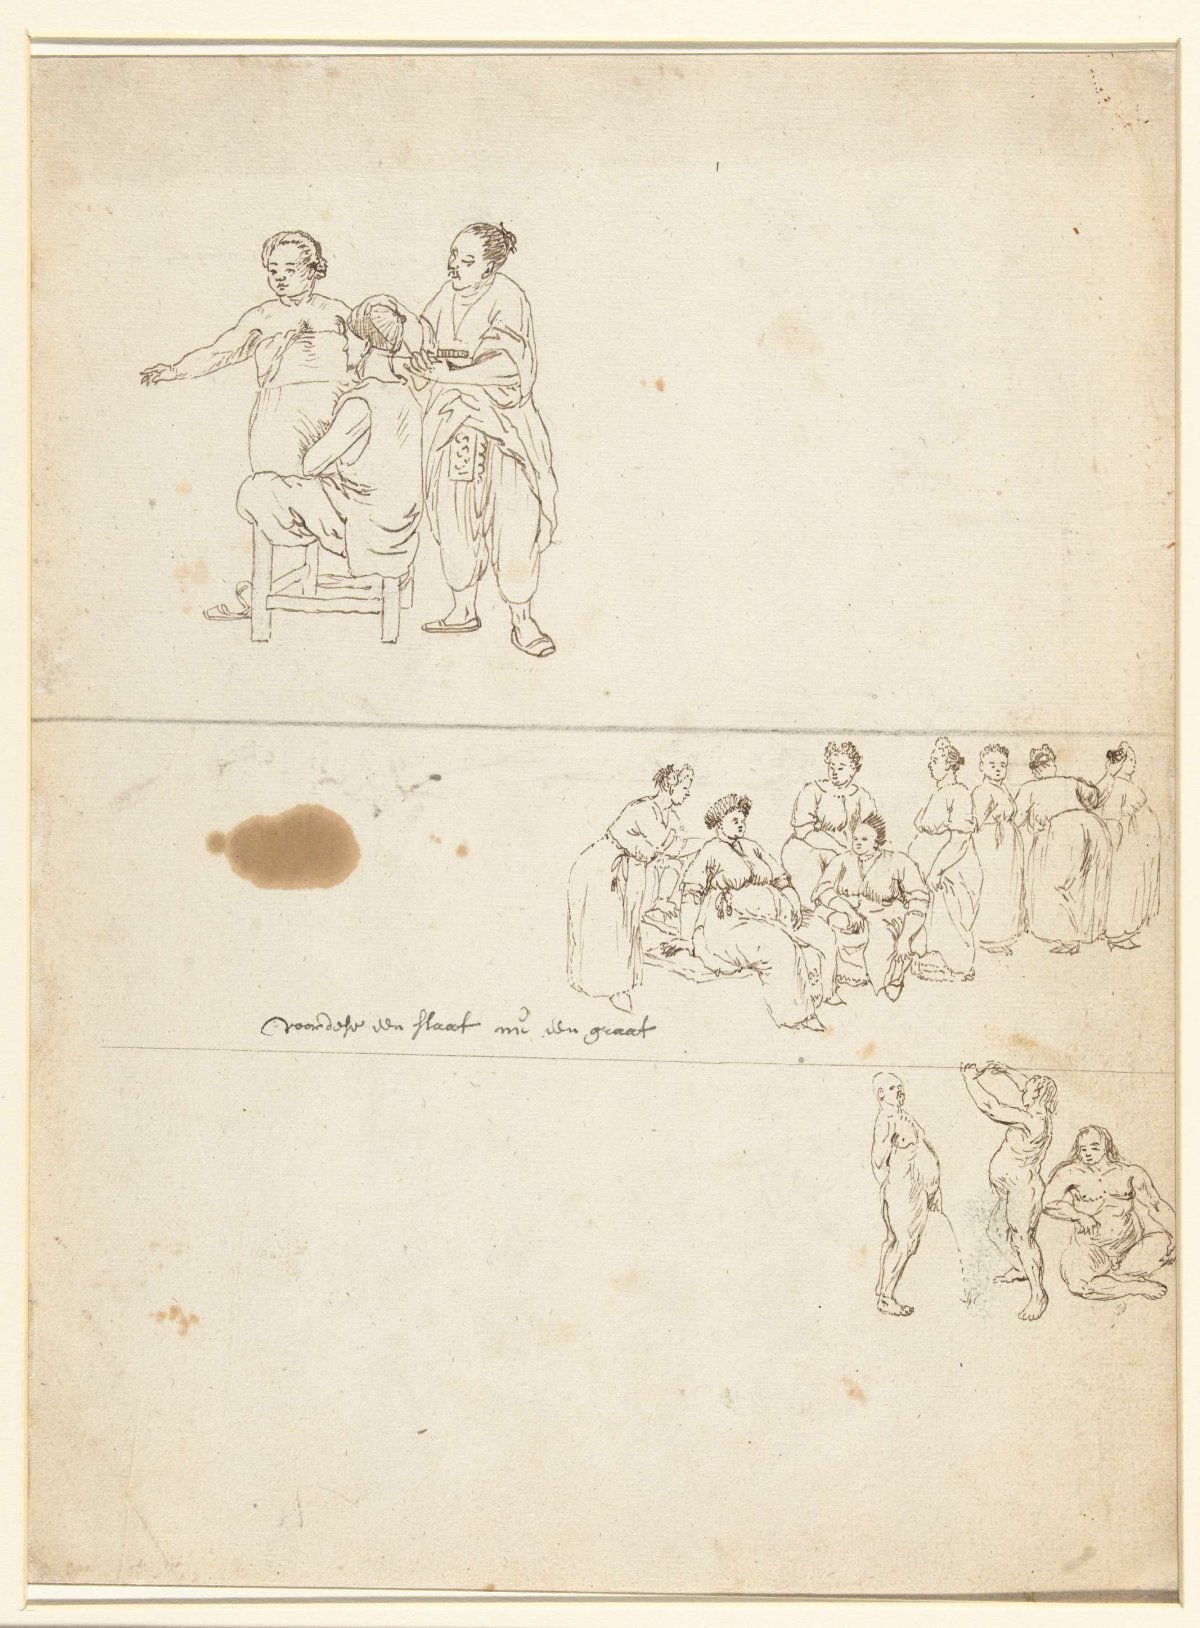 Sketches of a man, women and naked men, Wouter Schouten, c. 1660